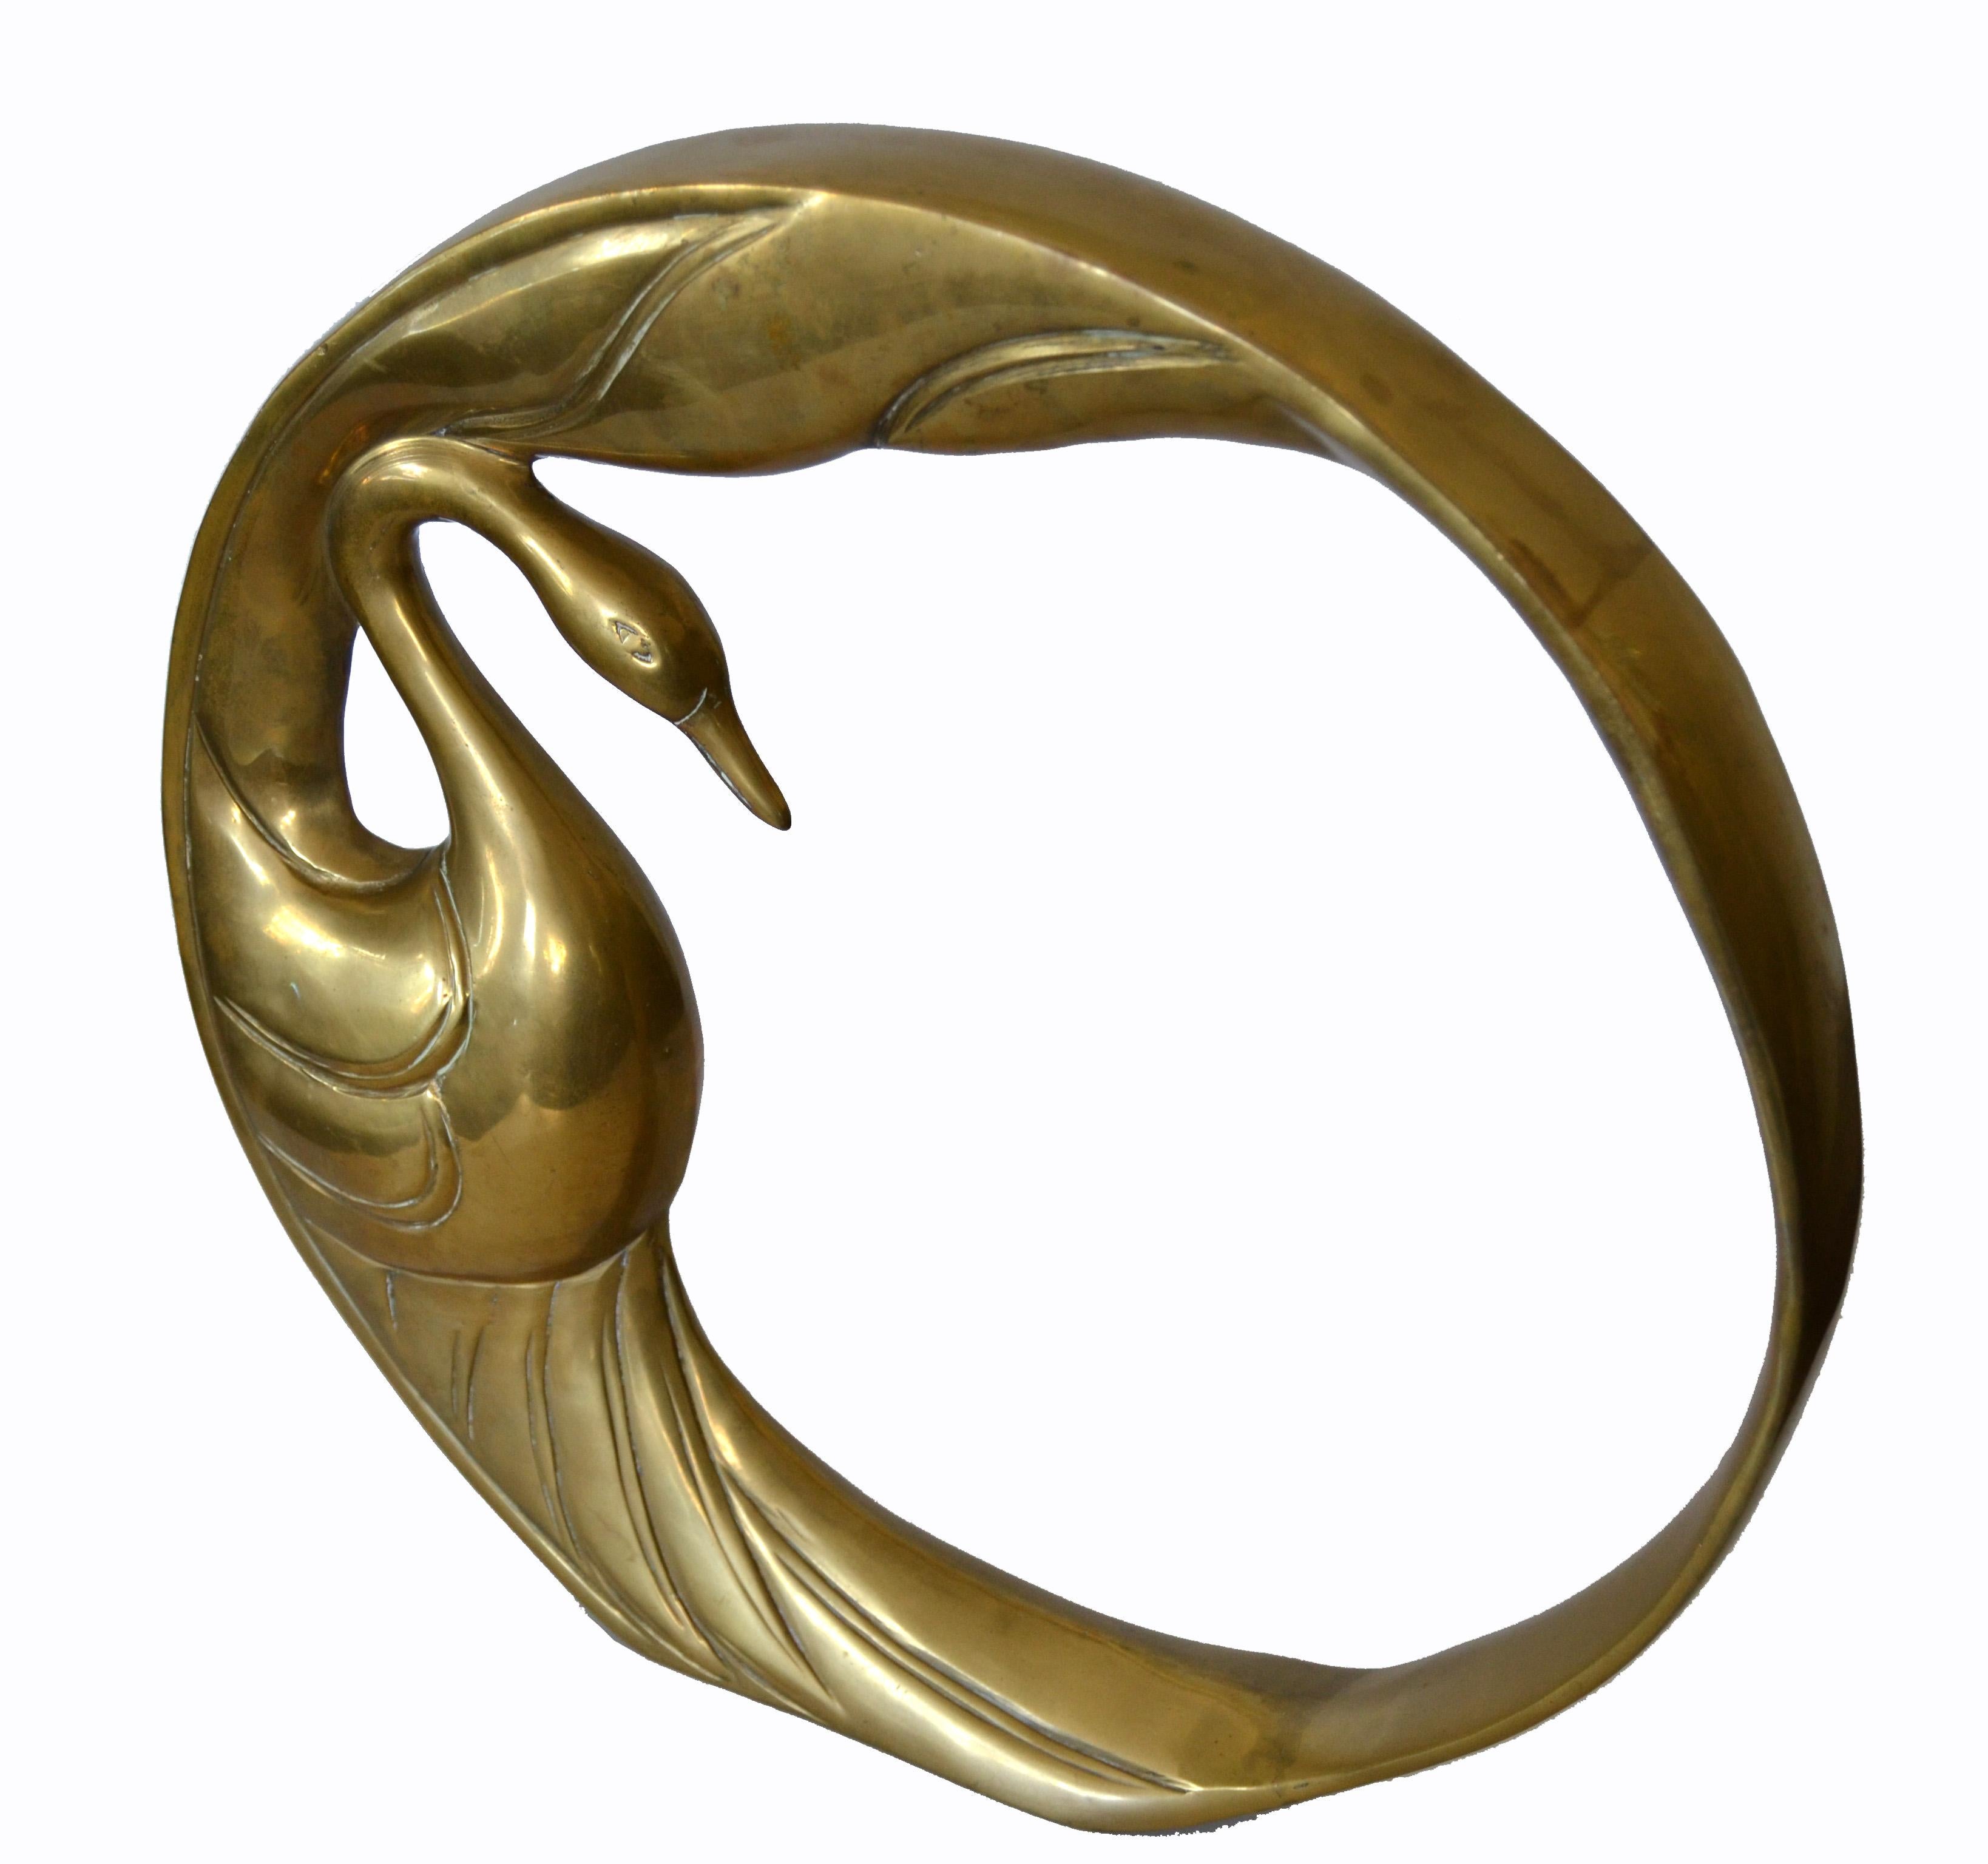 Mid-Century Modern Bronze Golden Swan Ring Table Sculpture by Dolbi Cashier 1984 For Sale 6